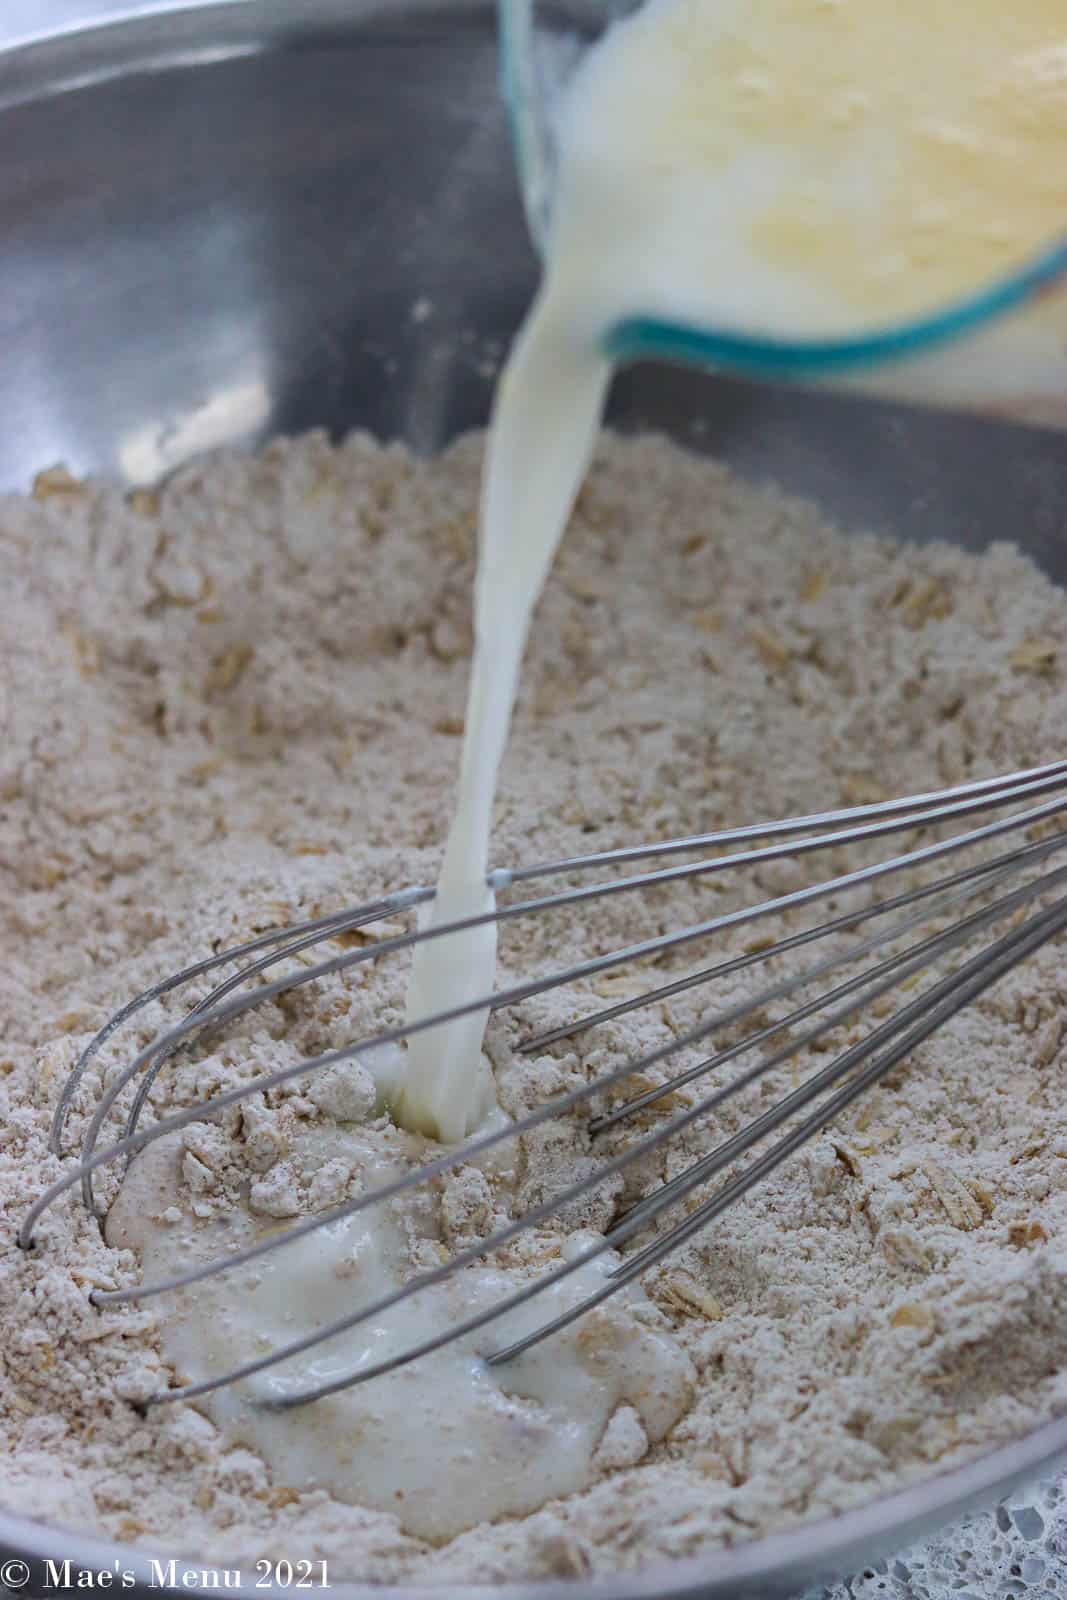 Pouring milk into the dry ingredients